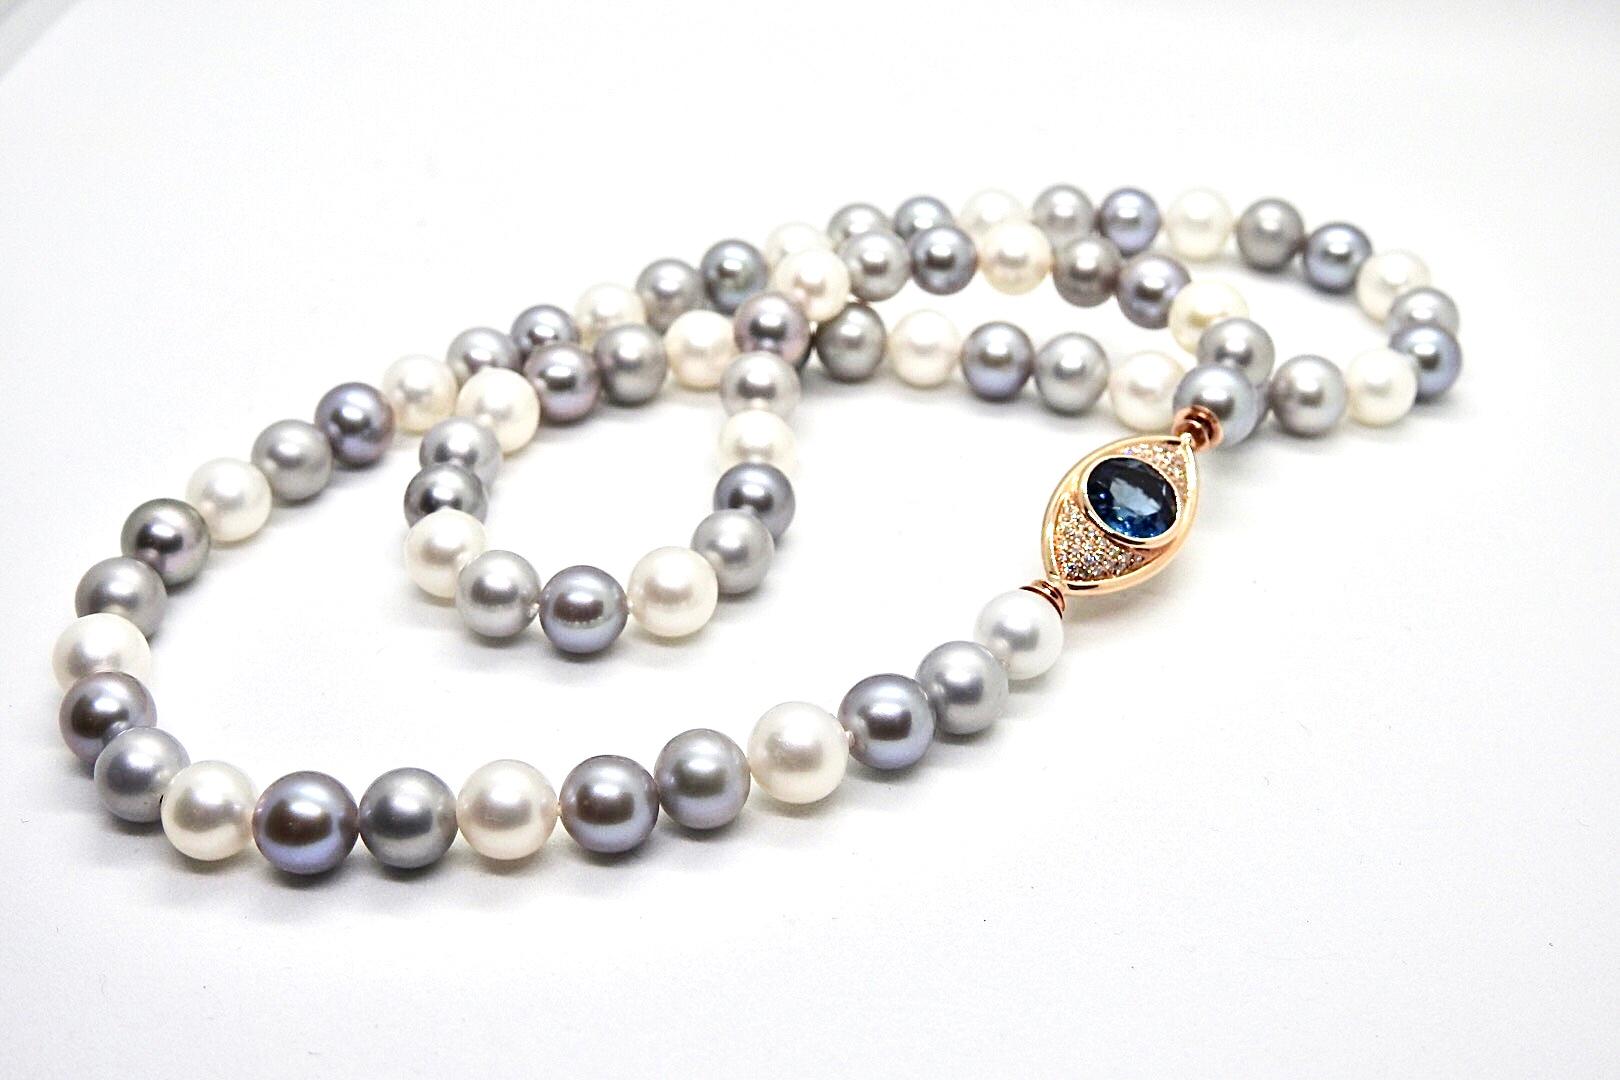 Pearls Necklace with 18 Karat Gold, Diamonds and Swiss Blue Topaz Eye Clasp For Sale 1